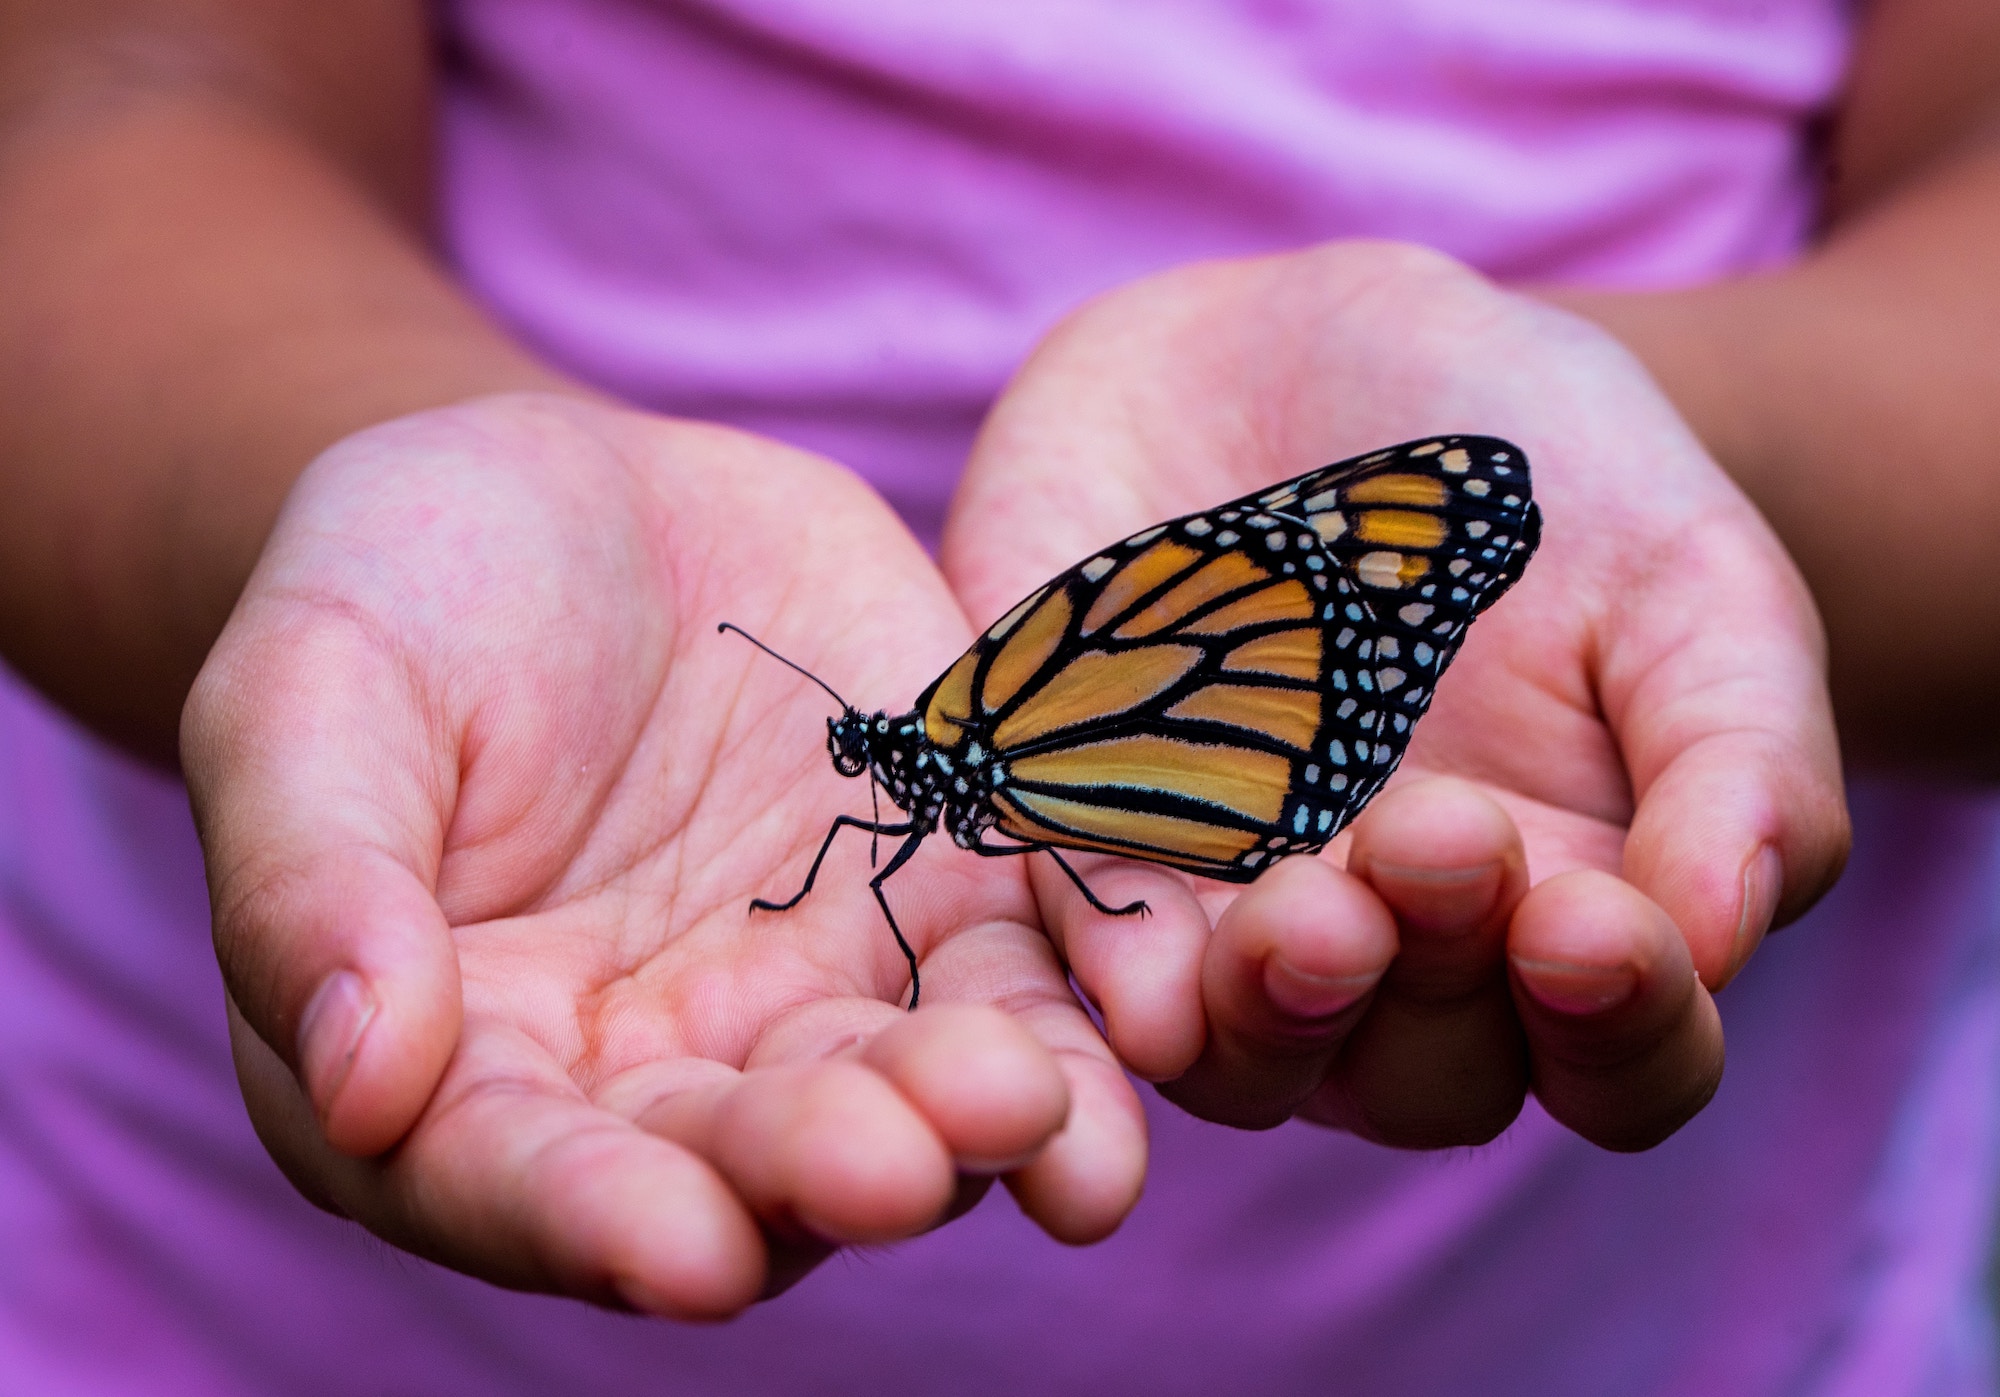 Butterfly on the hands of a person